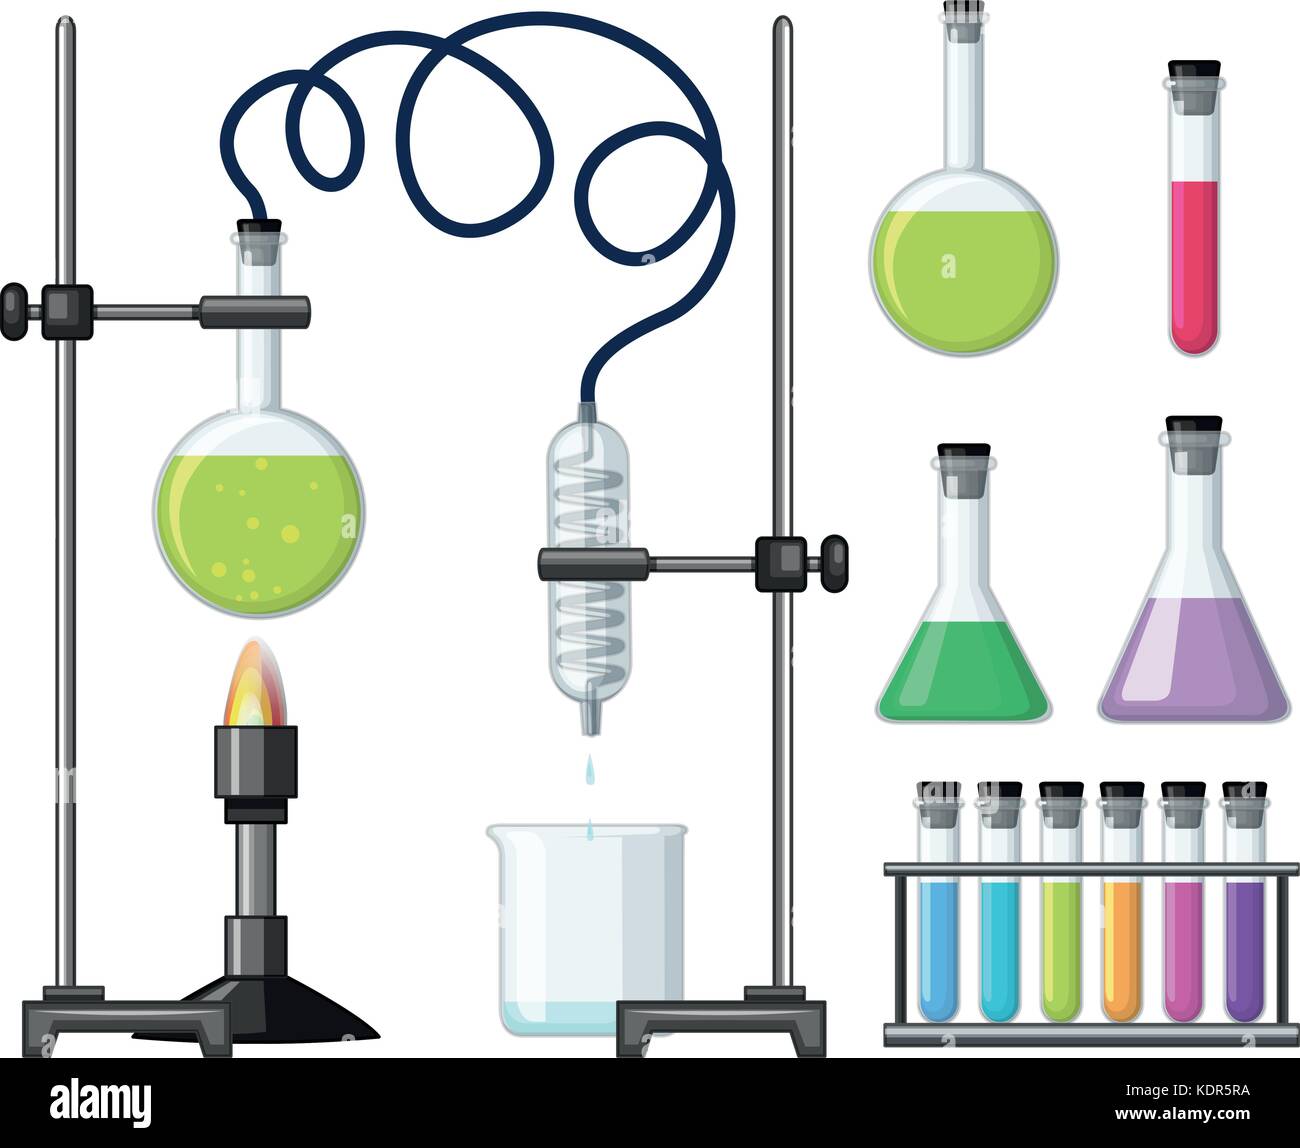 Different science containers and equipments illustration Stock Vector ...